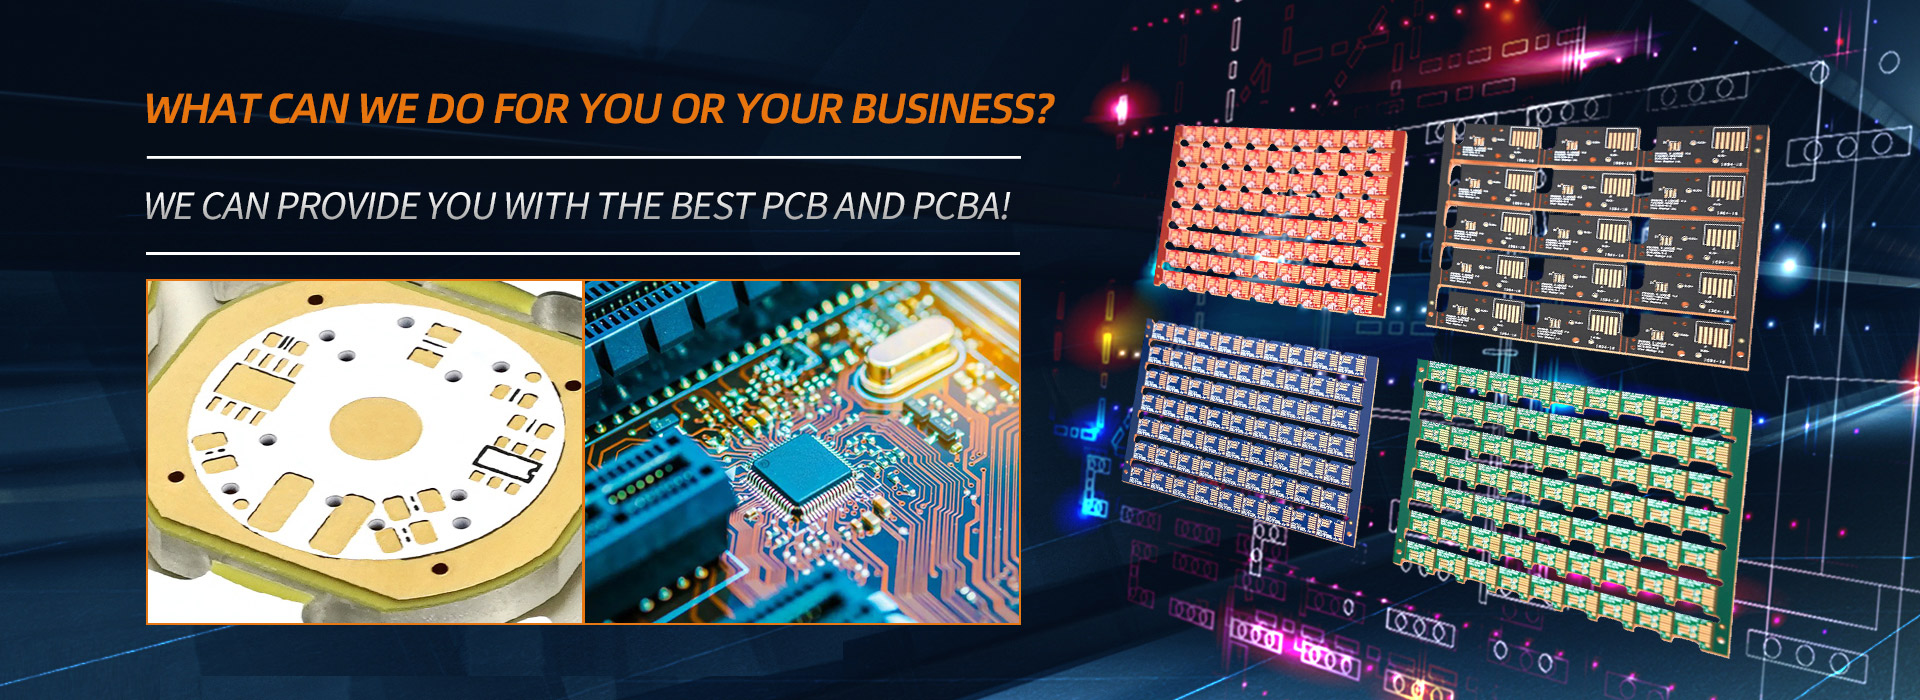 Aluminum Pcb Manufacturers and Suppliers